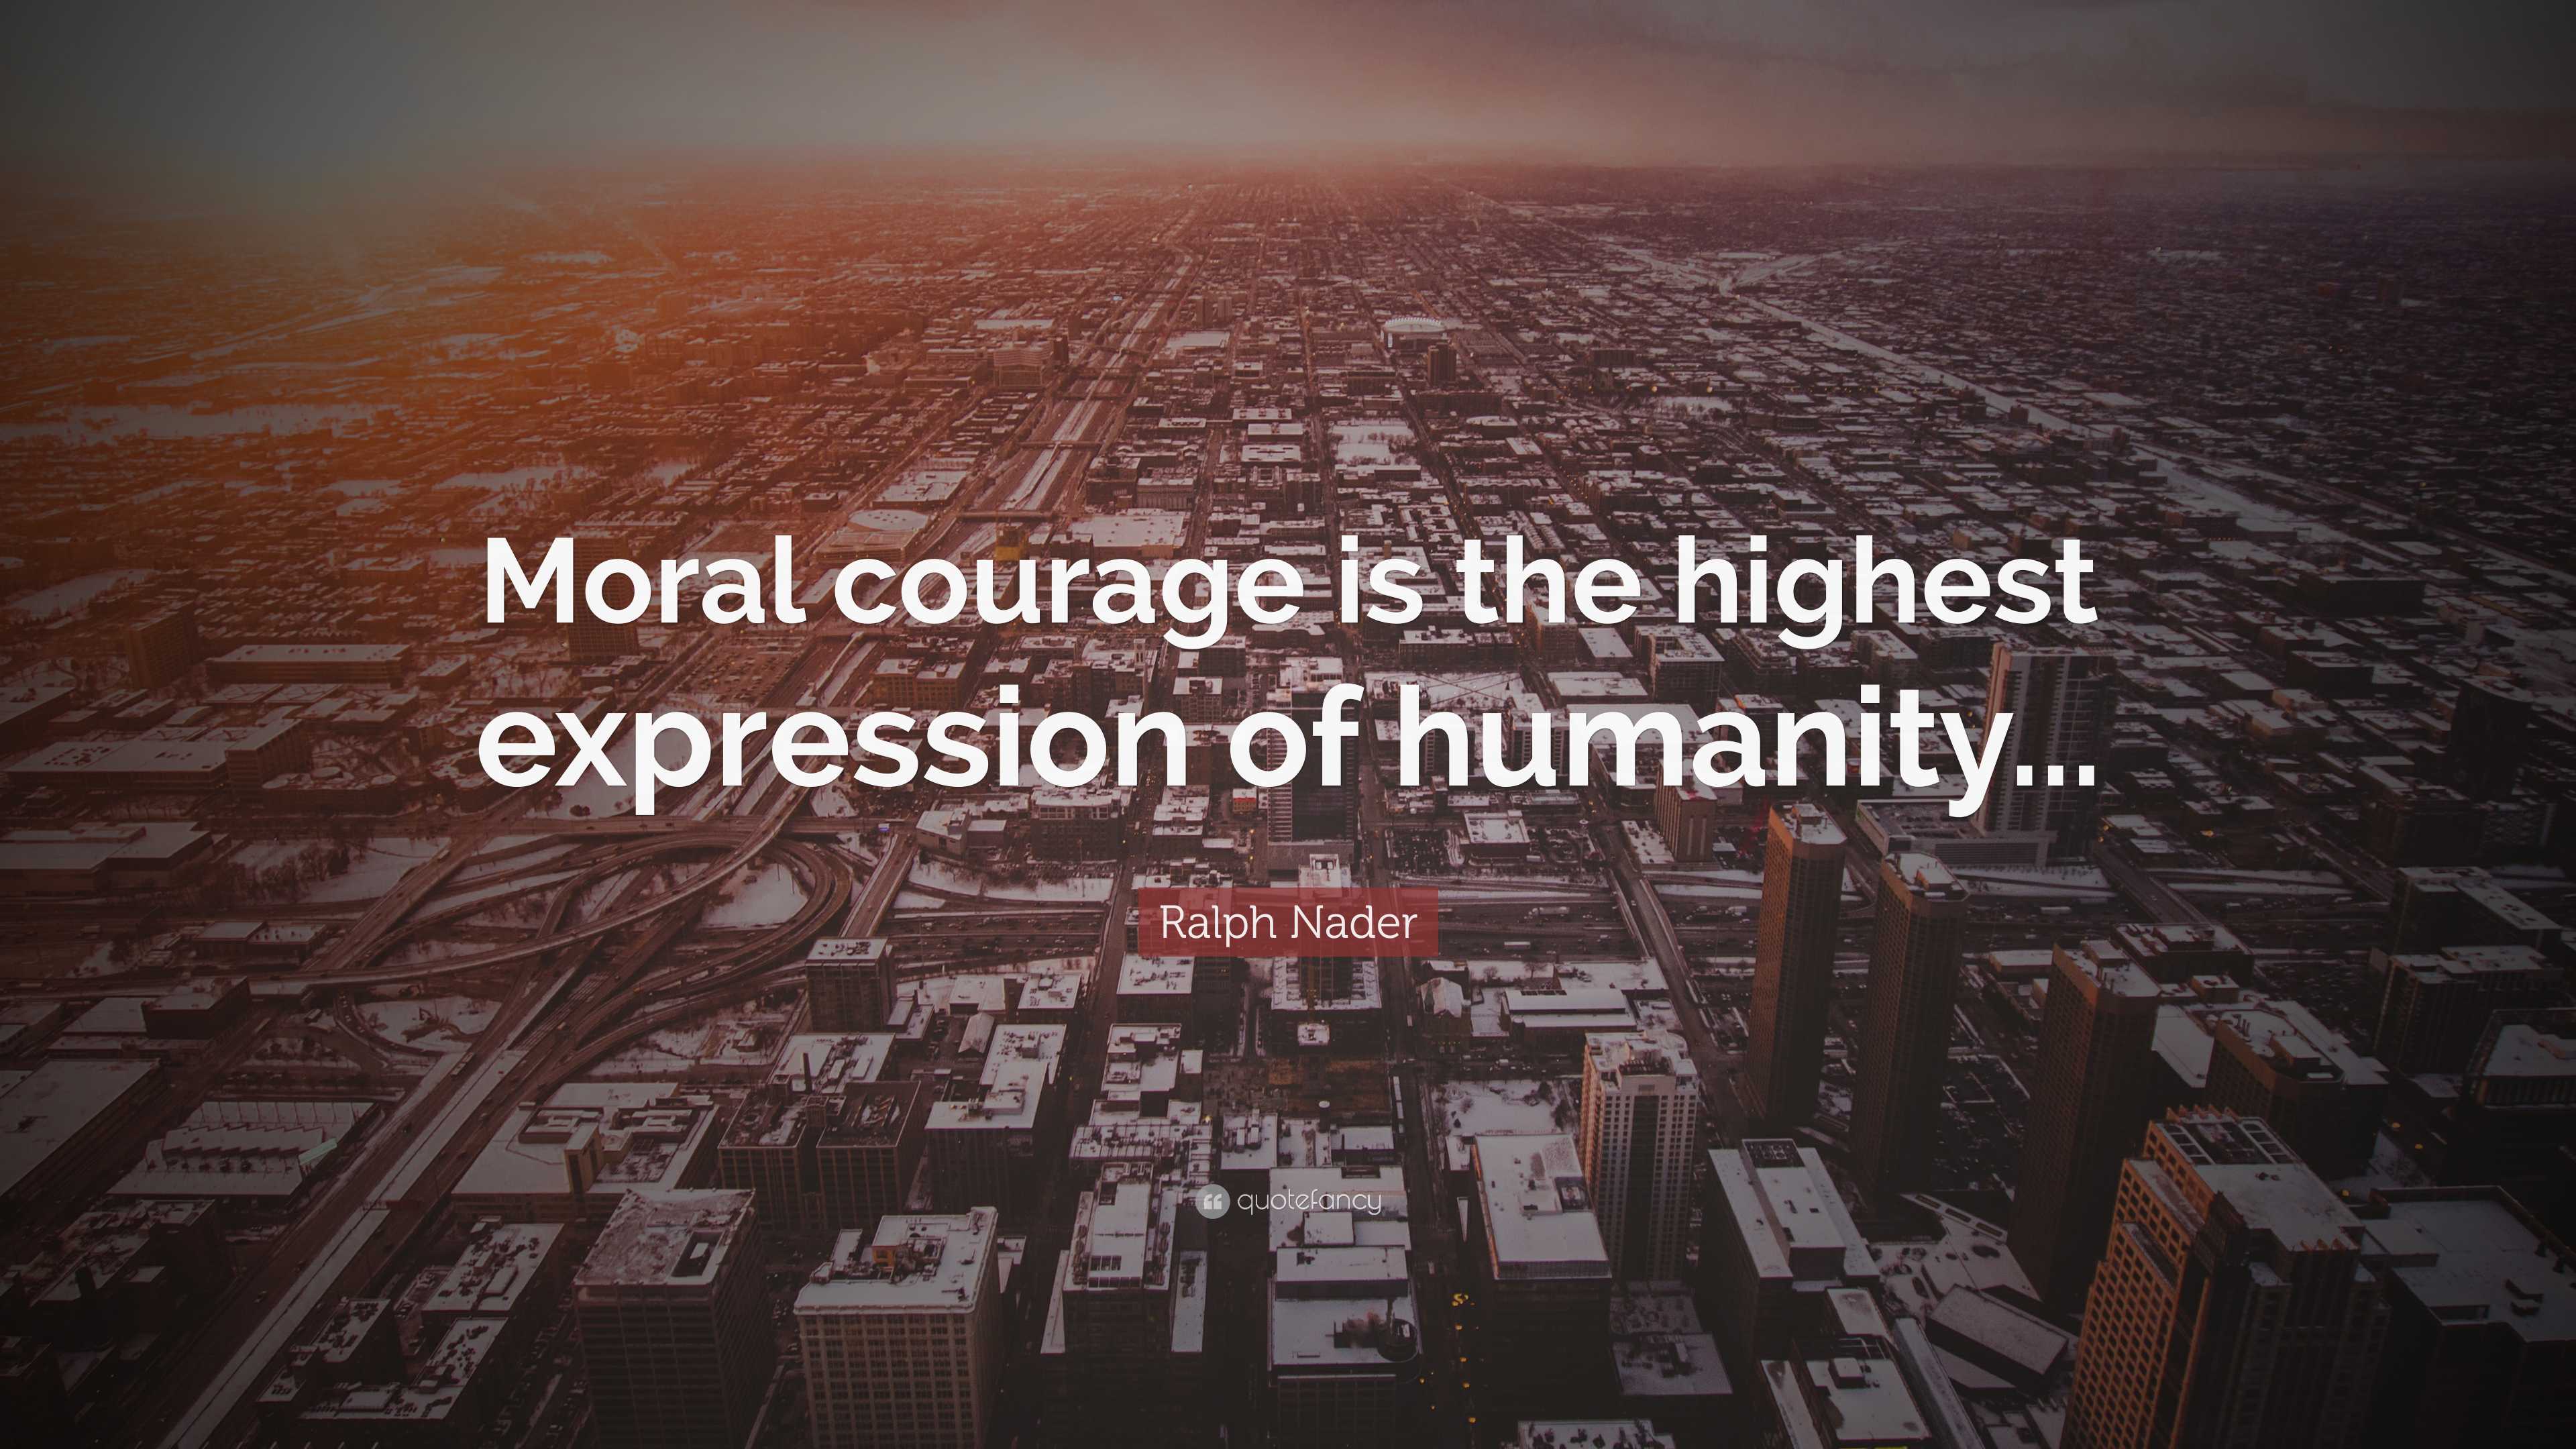 Ralph Nader Quote: “Moral courage is the highest expression of